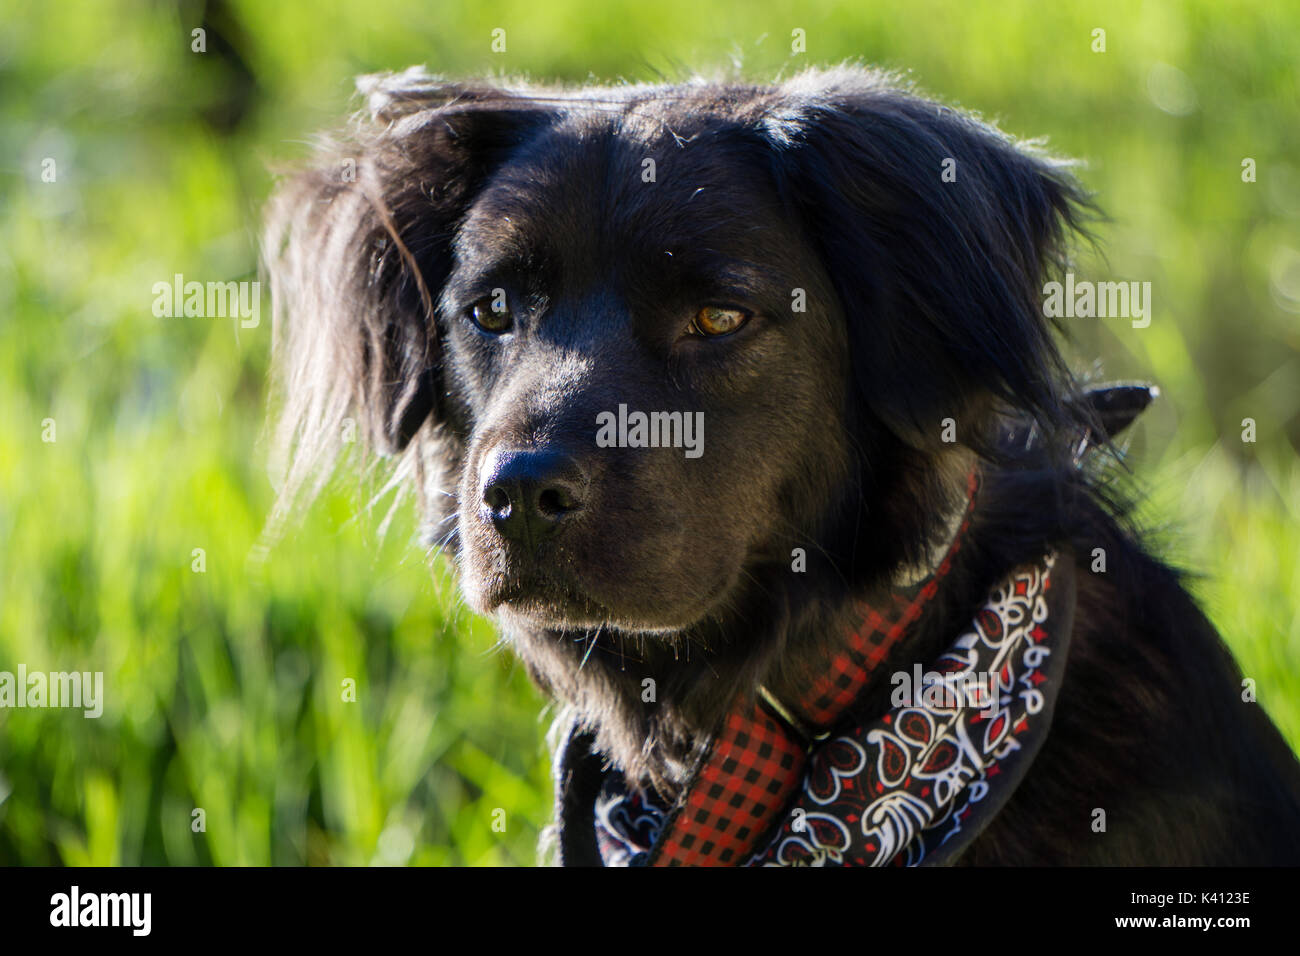 Black dog staring at something in the distance while outside on a walk. Stock Photo